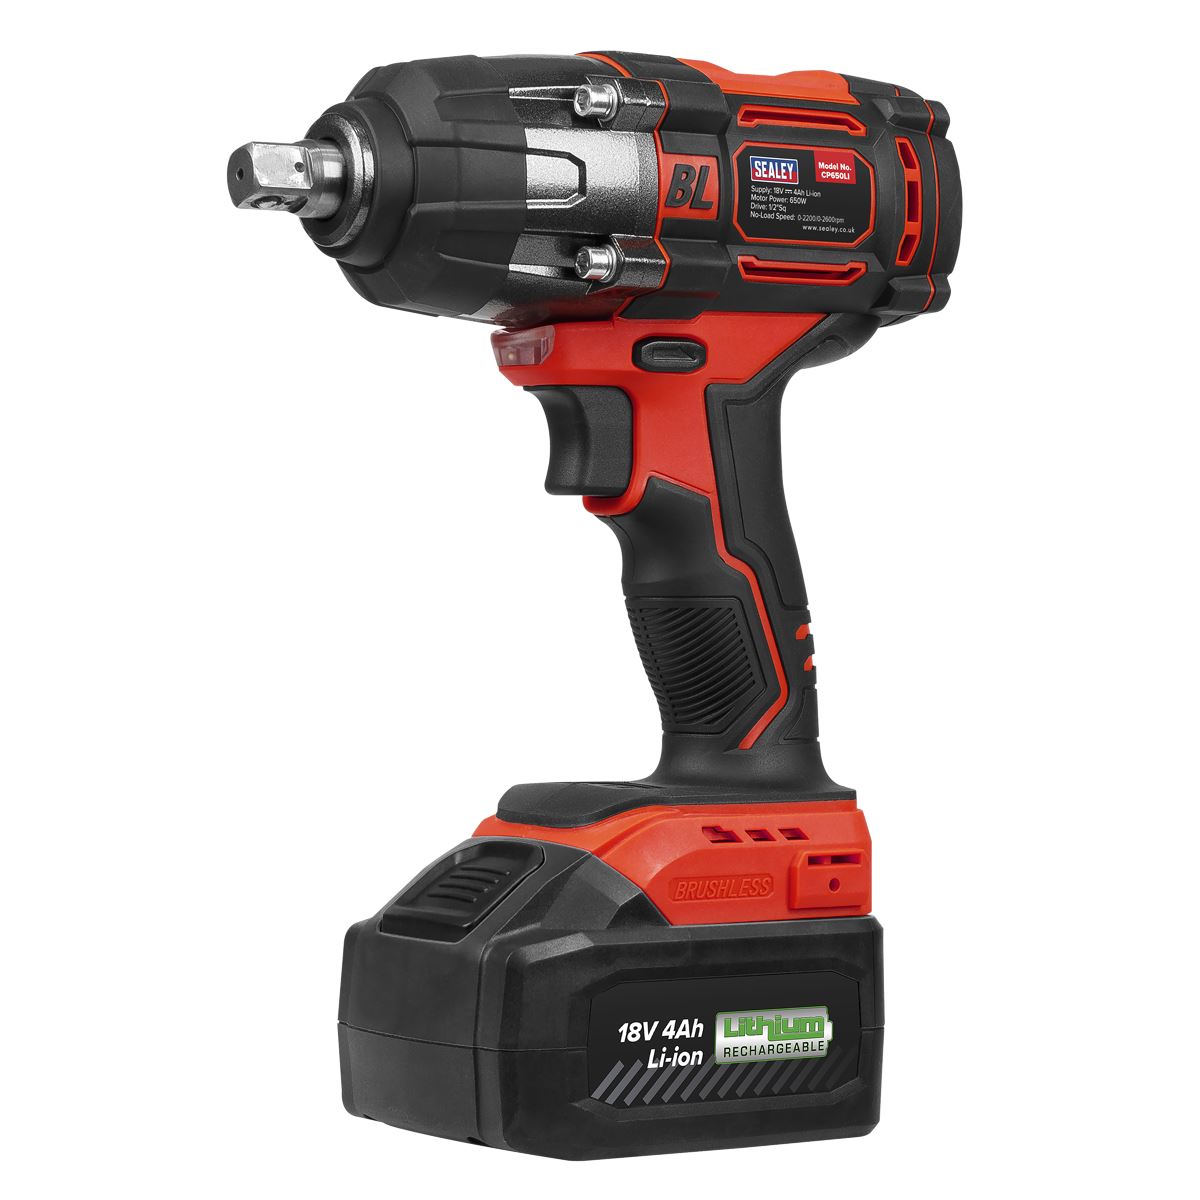 Sealey Cordless Brushless Impact Wrench 18V 4Ah Lithium-ion 1/2"Sq Drive